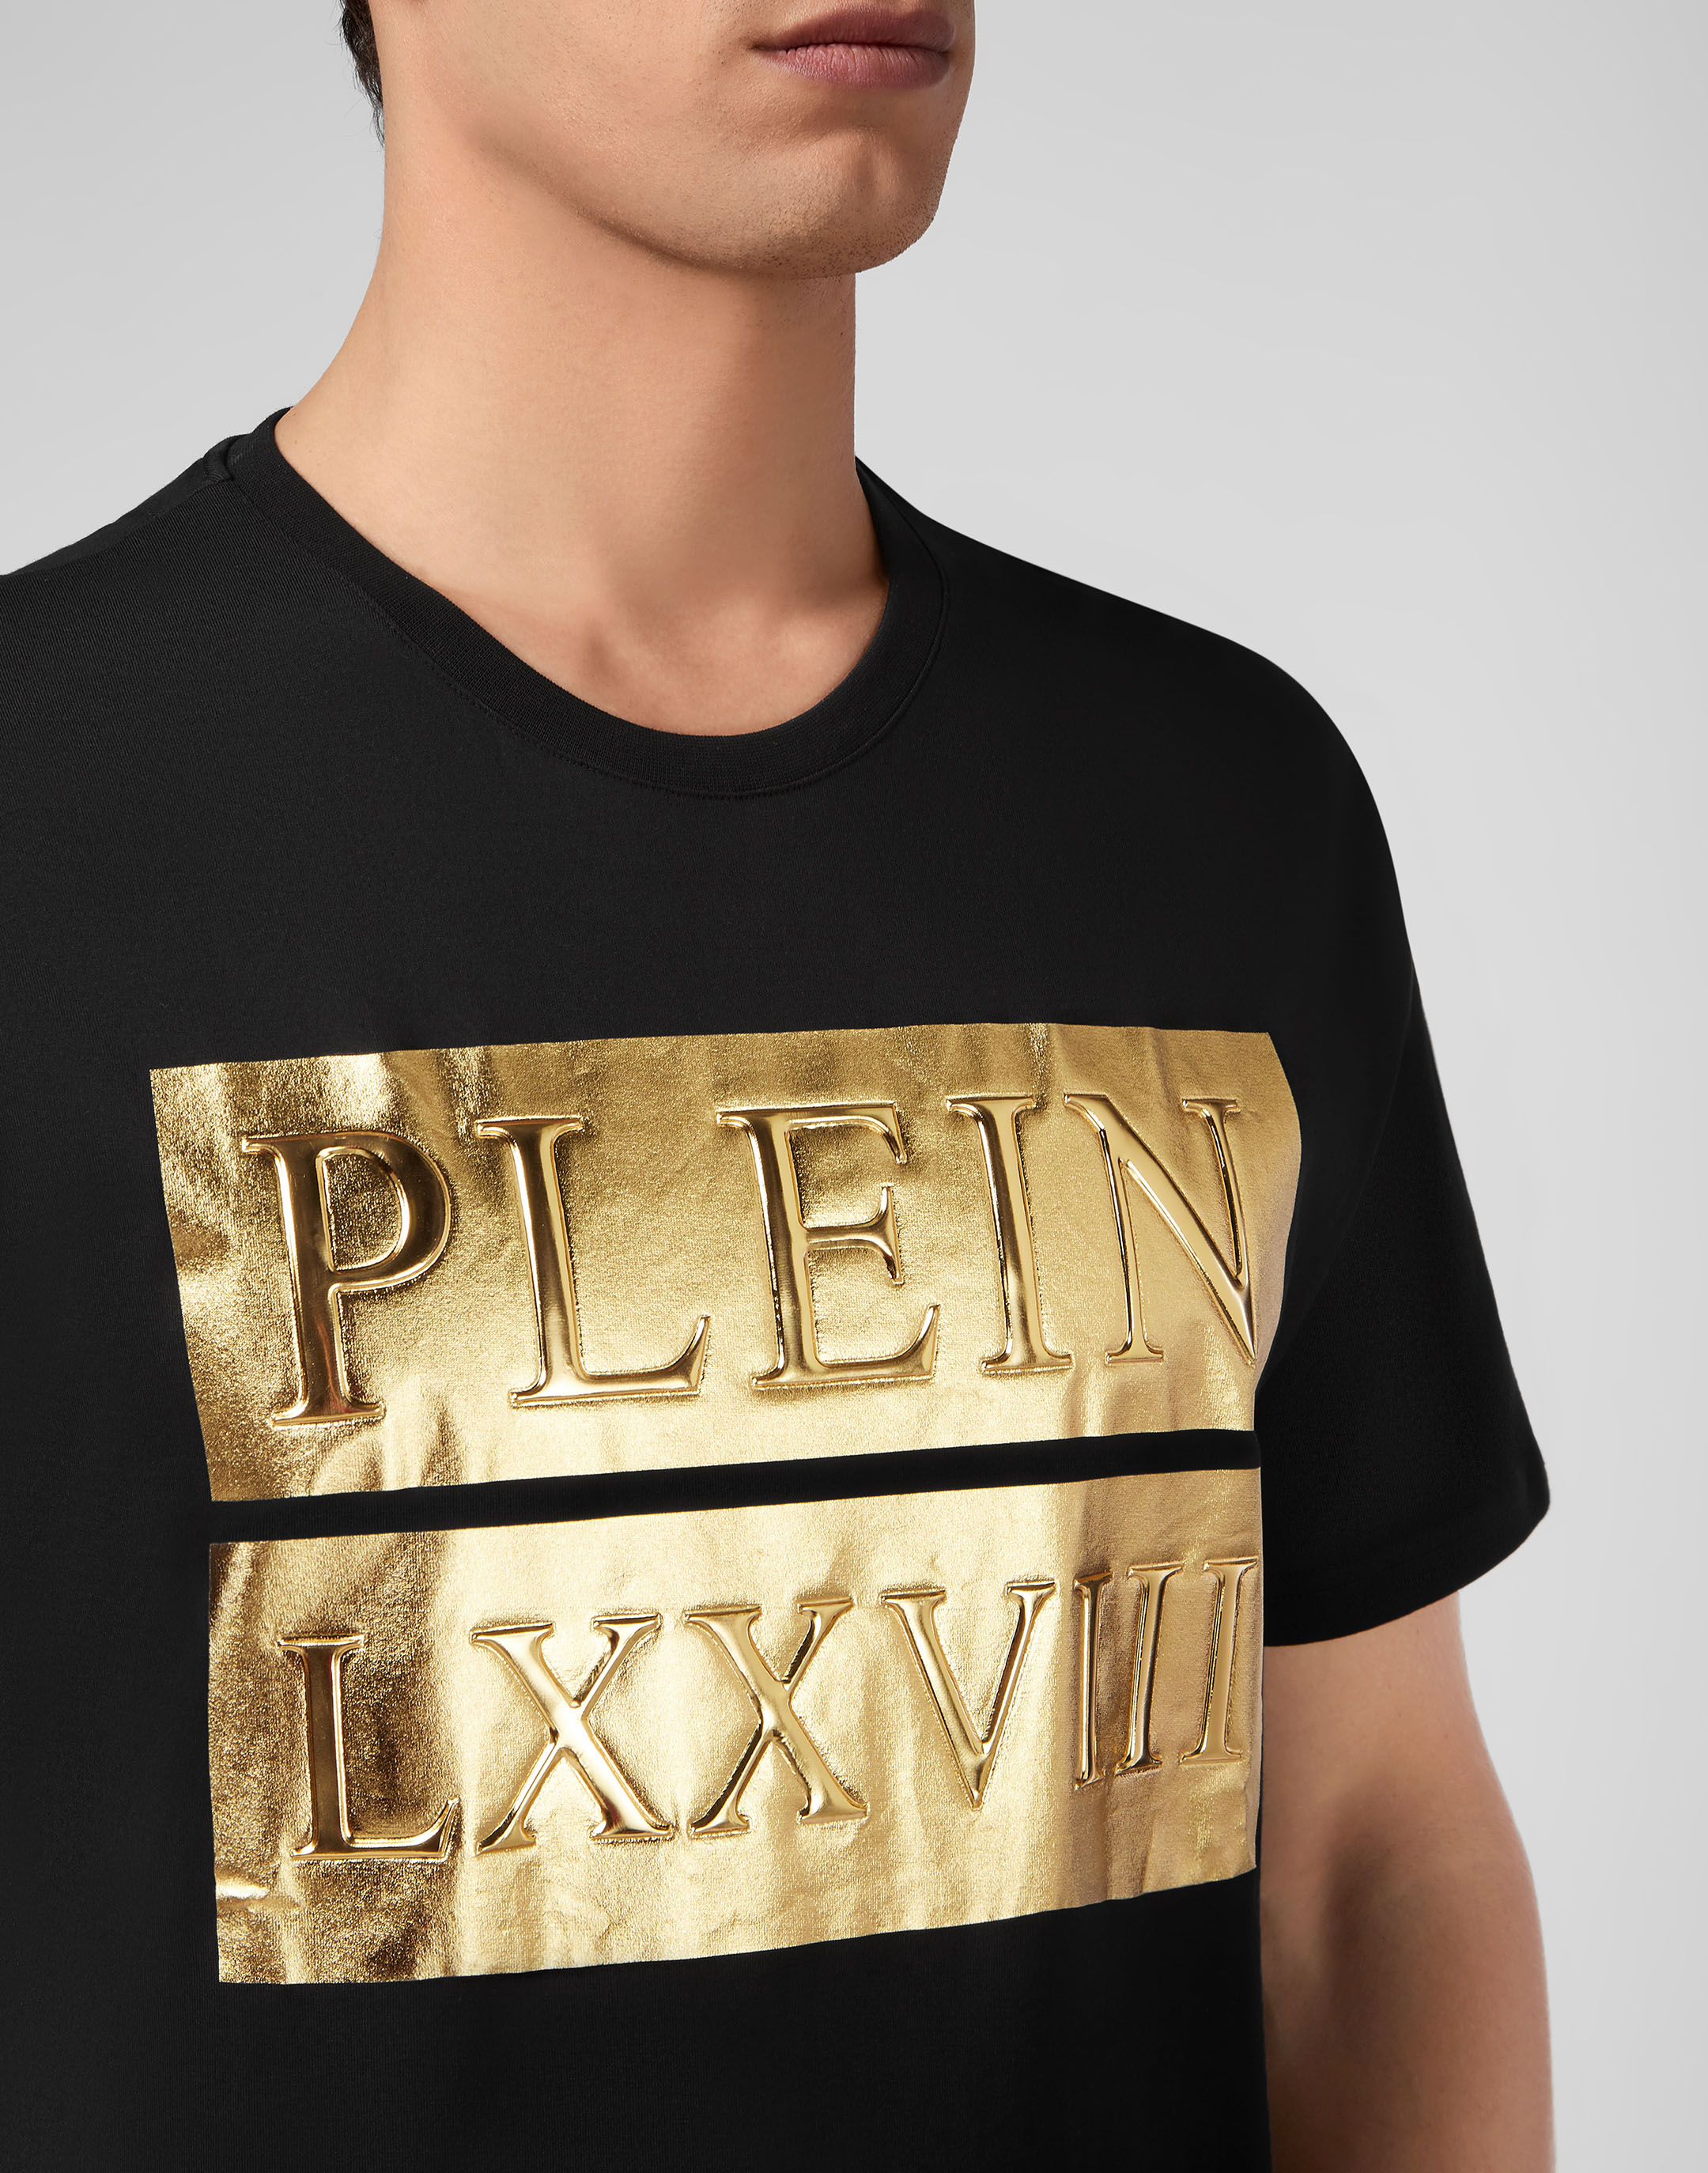 Goals T-Shirt - Gold Print – pointblankclothing